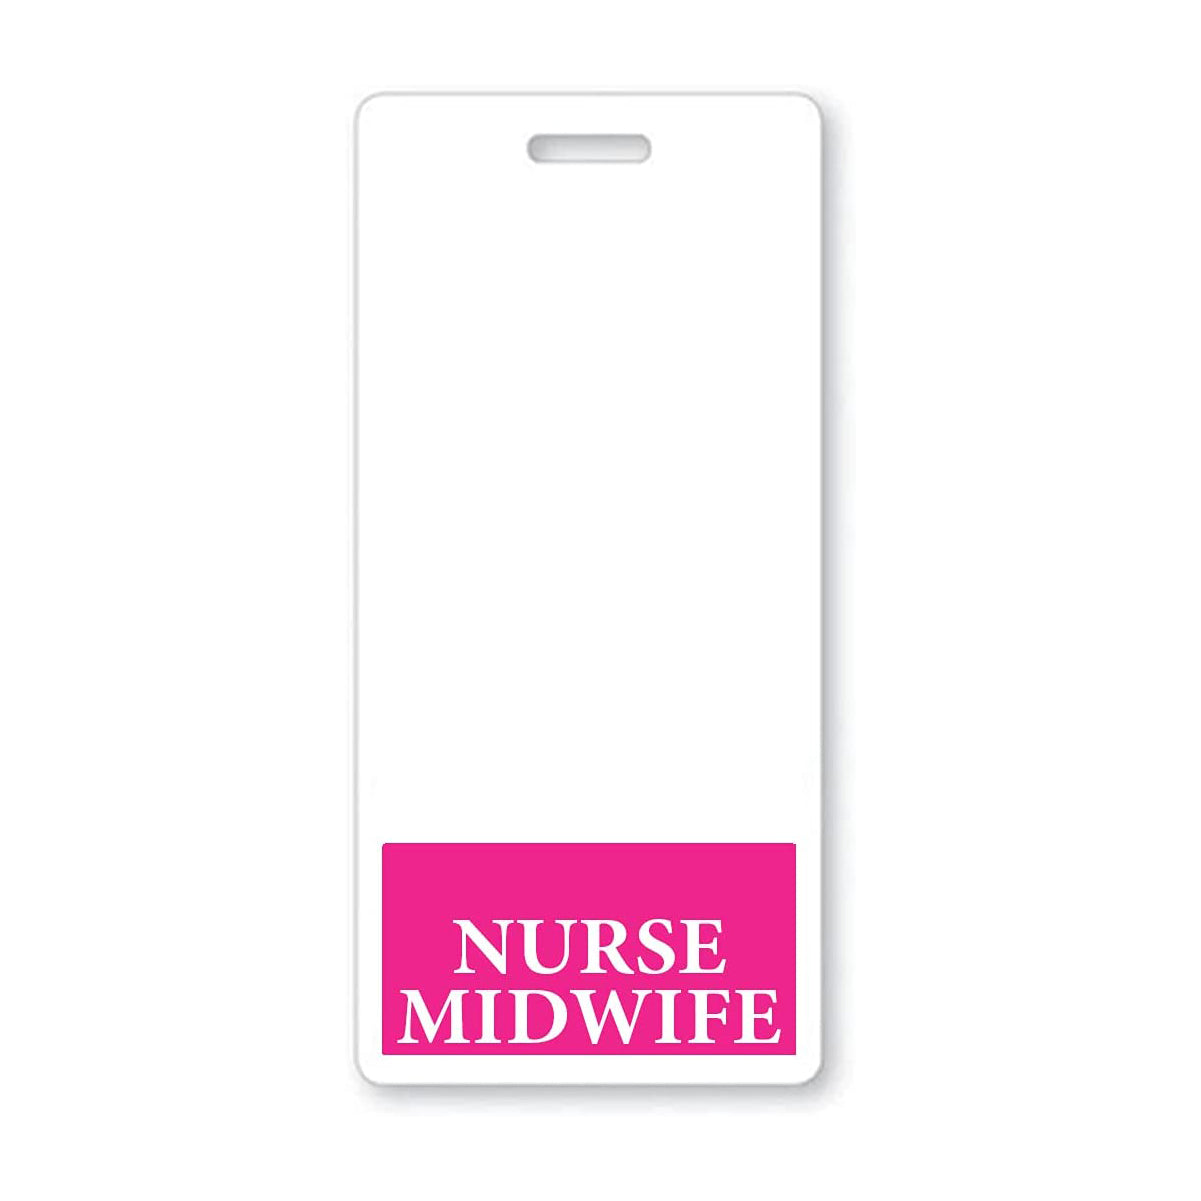 Hot Pink "NURSE MIDWIFE" Vertical Badge Buddy with Hot Pink Border 